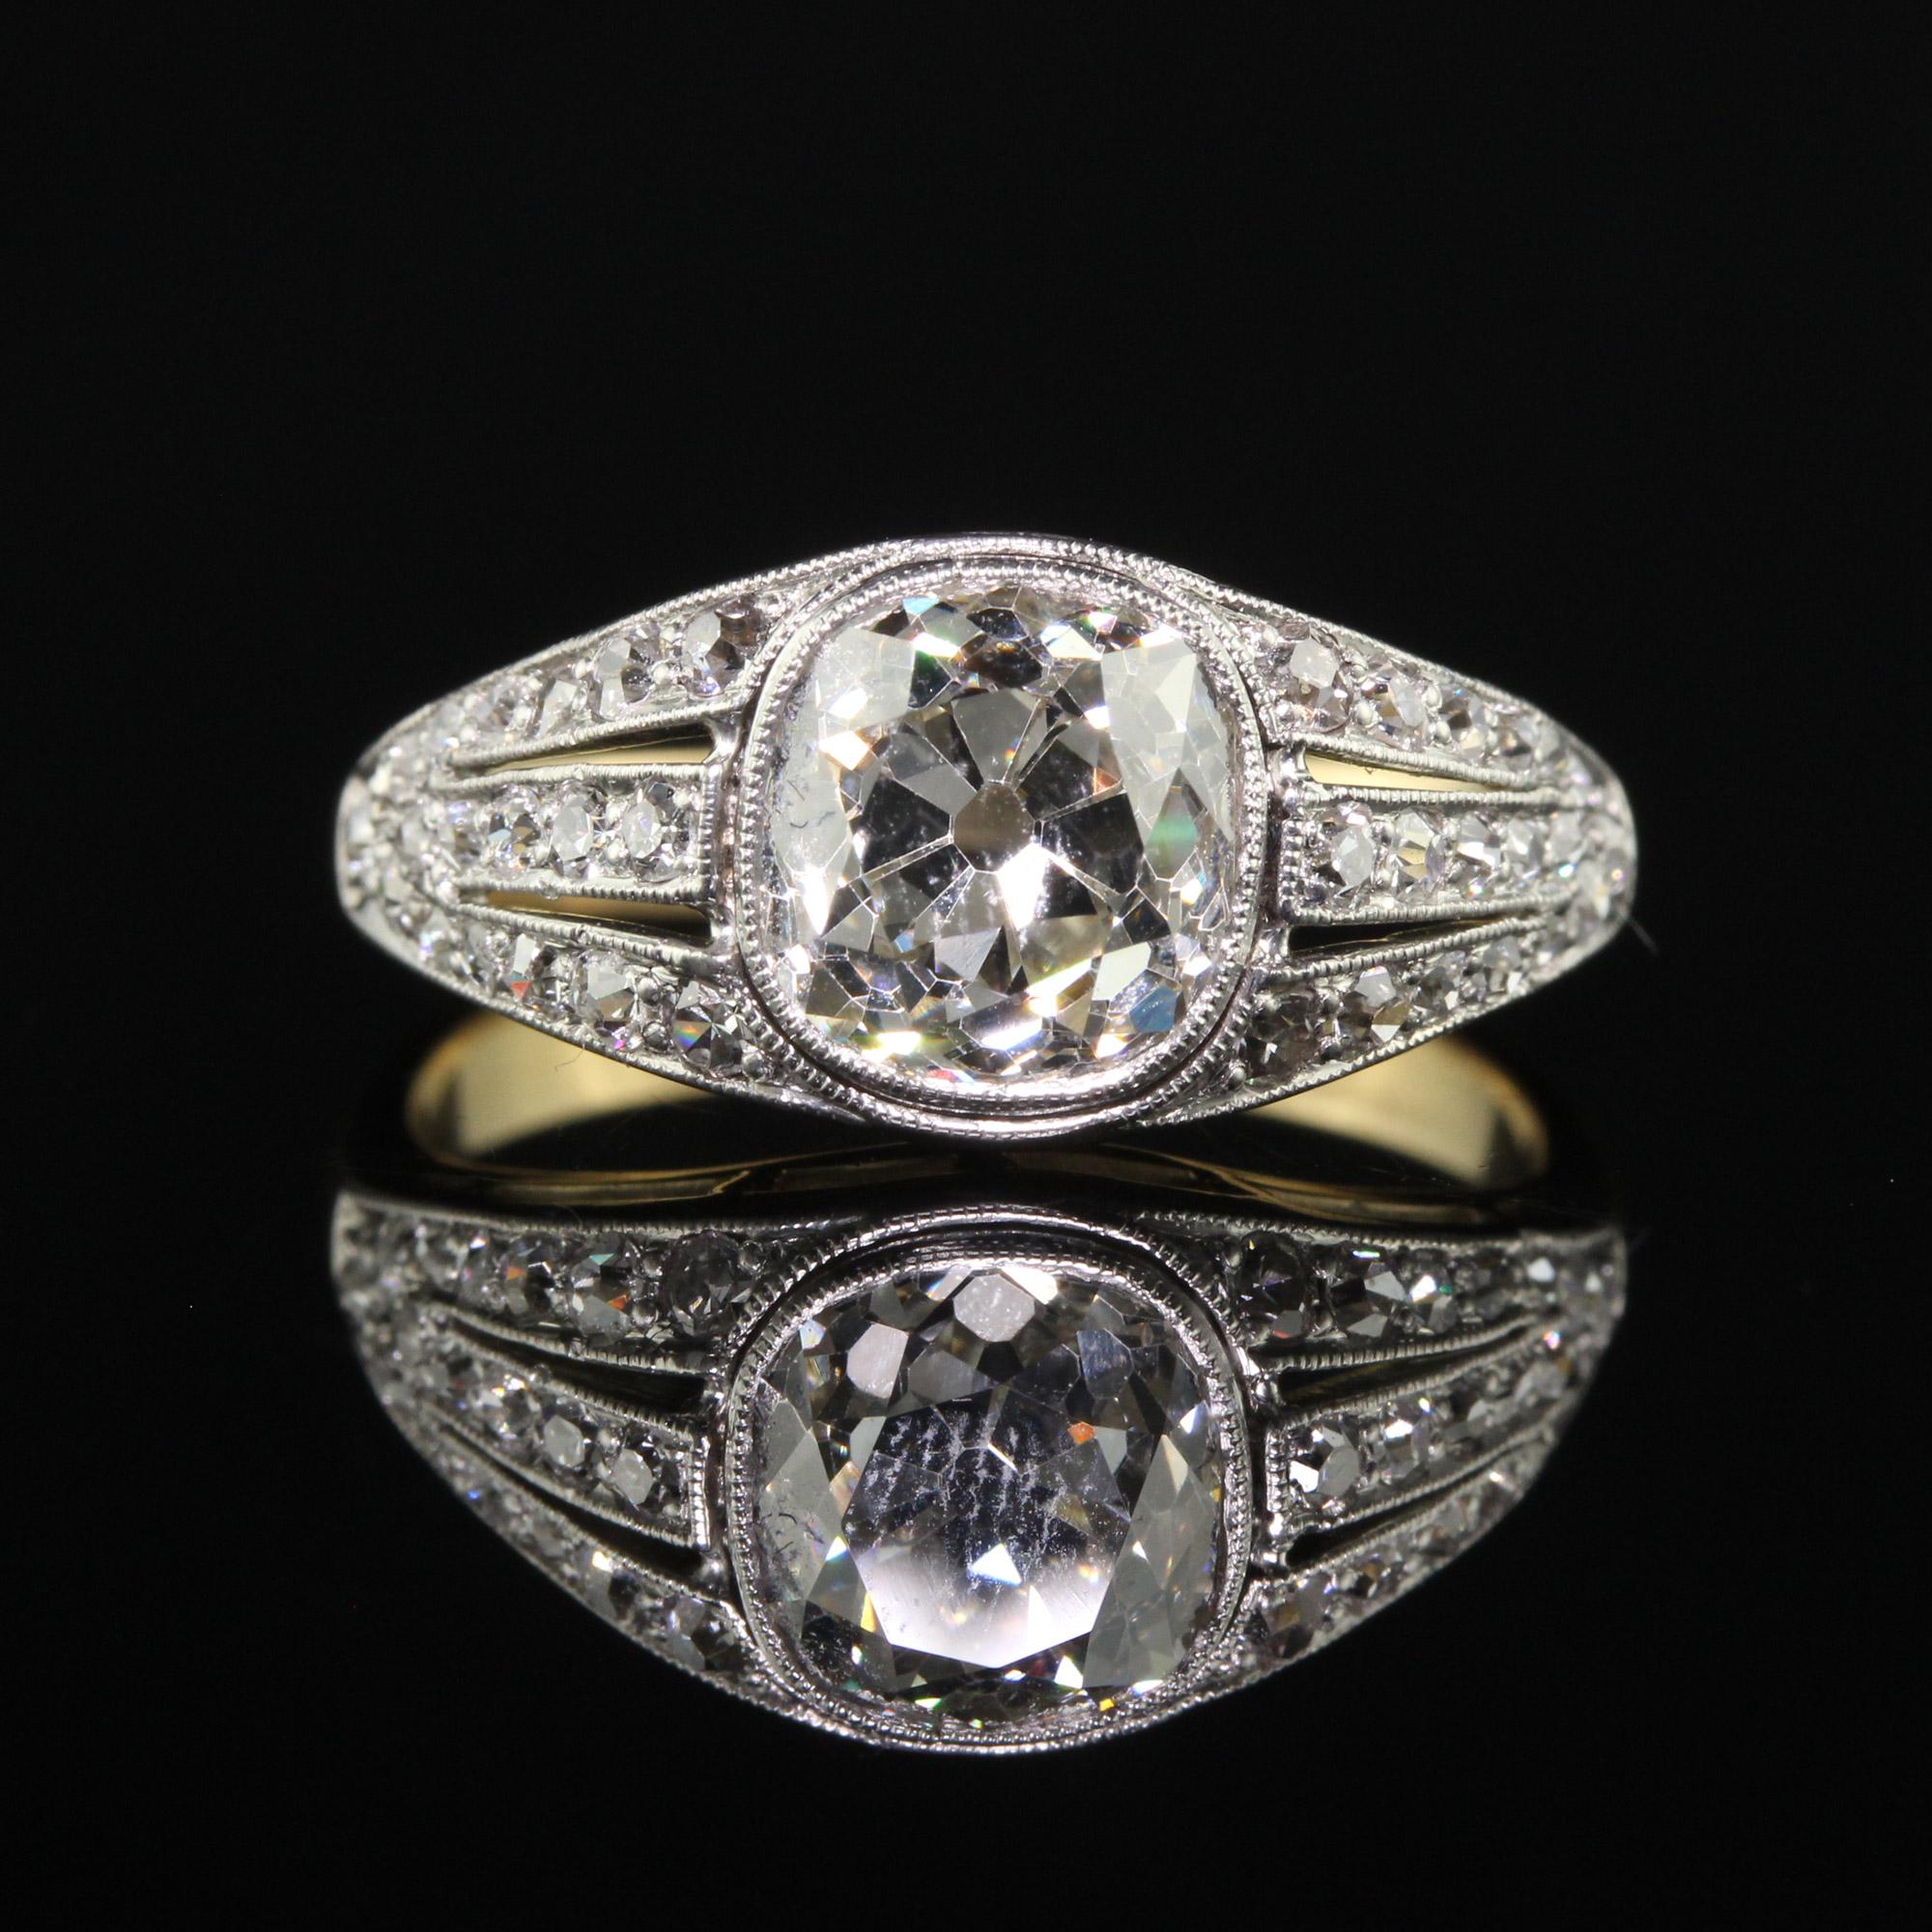 Antique Edwardian 18K Gold Platinum Old Mine Diamond Engagement Ring - GIA In Good Condition For Sale In Great Neck, NY